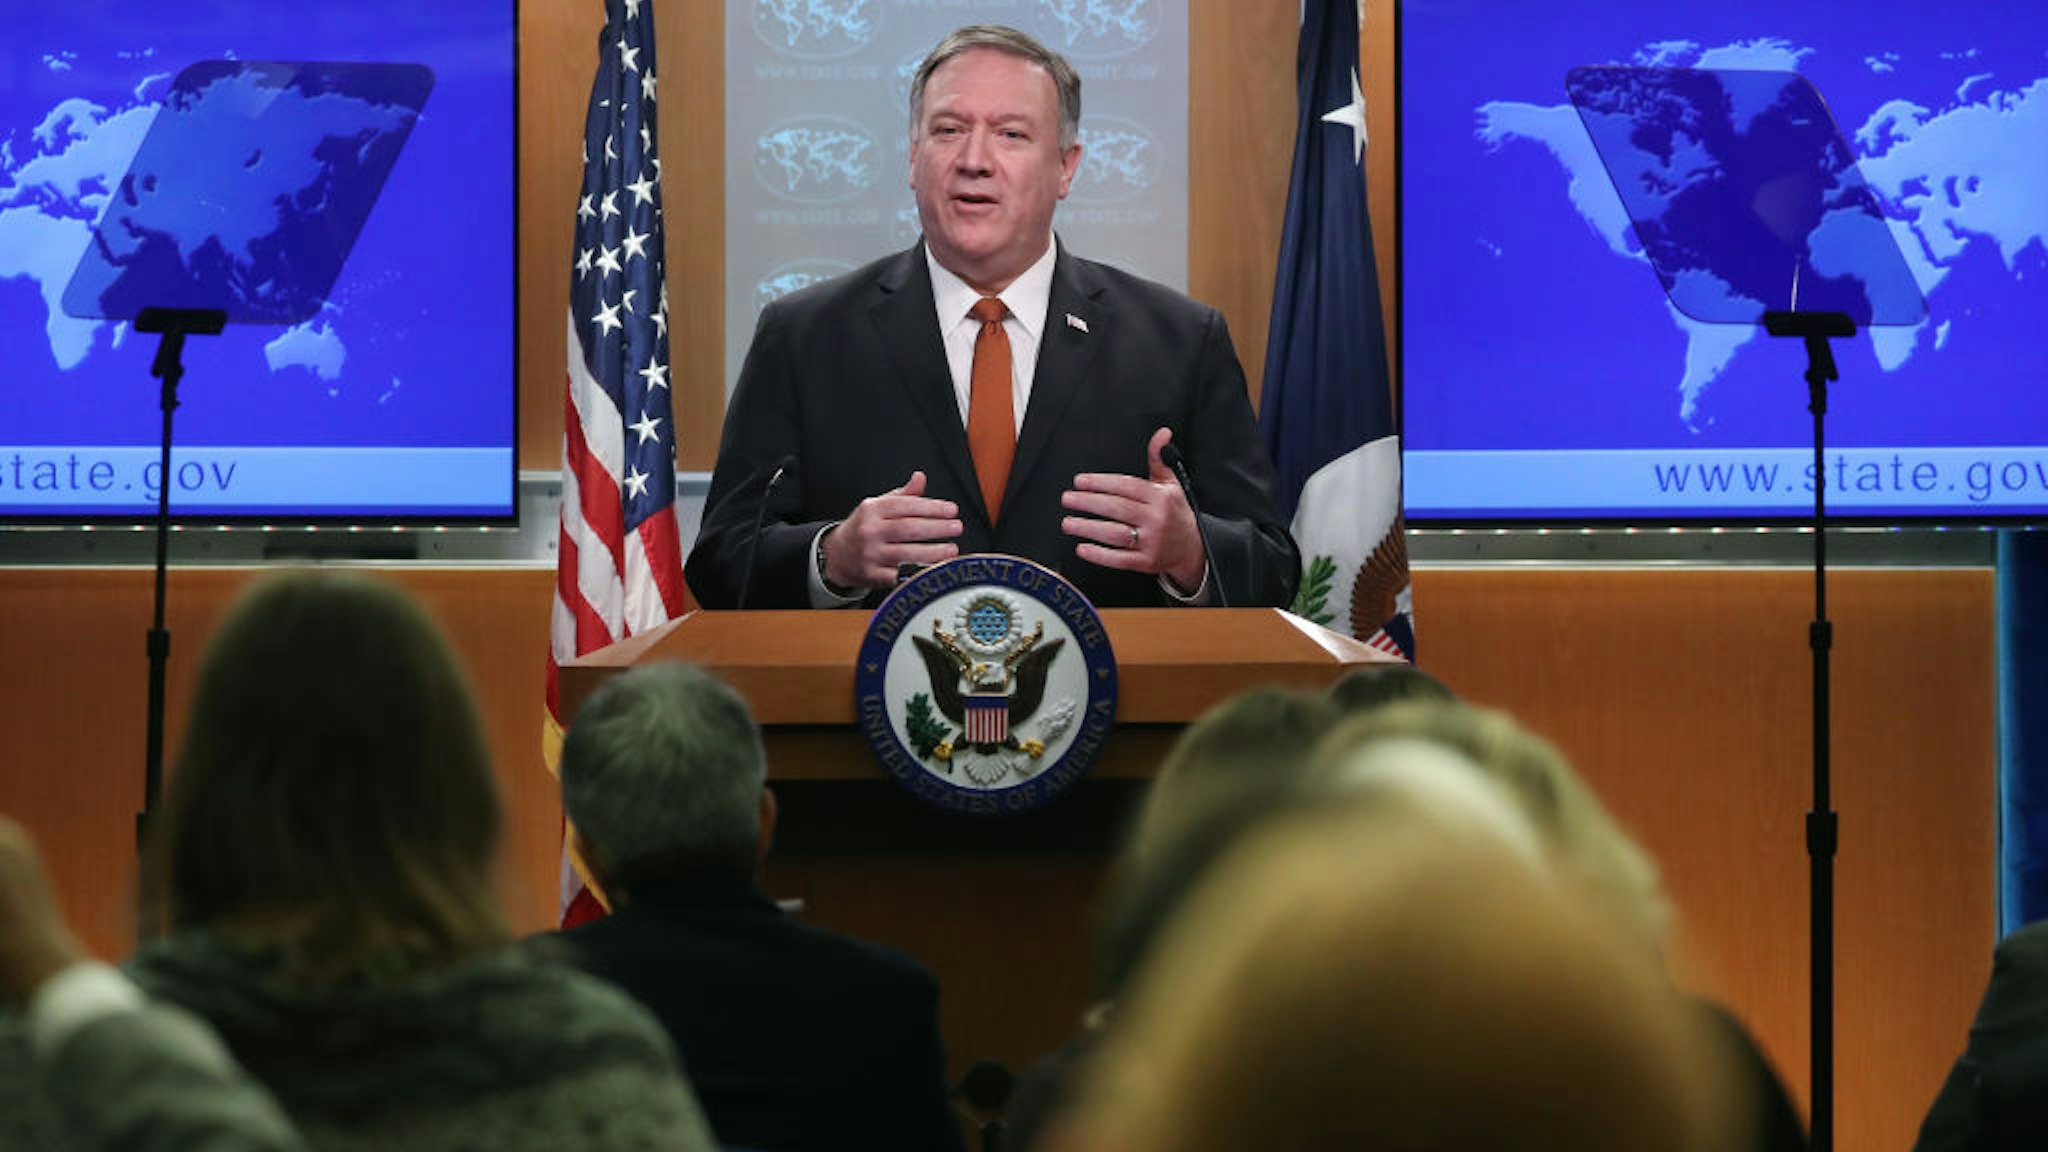 WASHINGTON, DC - NOVEMBER 26: U.S. Secretary of State Mike Pompeo speaks to the media in the briefing room at the State Department, on November 26, 2019 in Washington, DC. Secretary Pompeo spoke on several topics including Iran, Cuba, and recent protests in Hong Kong.